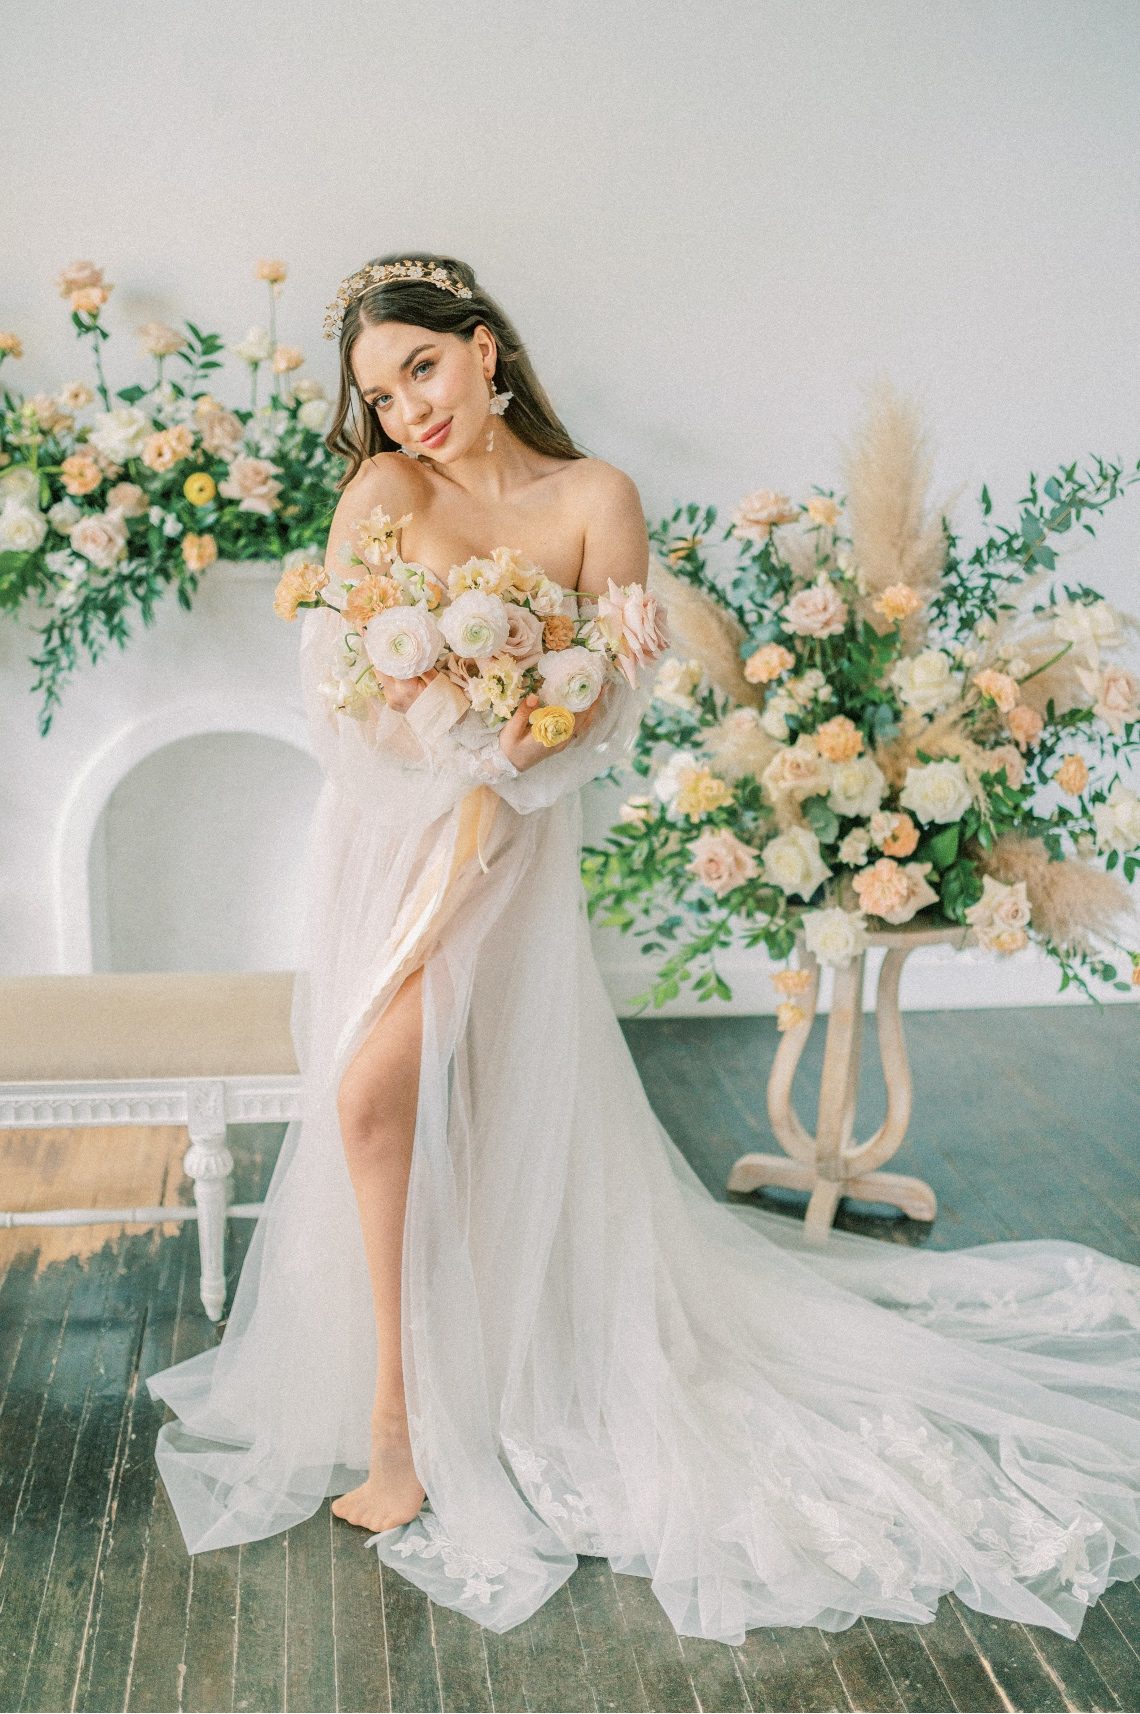 Our beautiful model holding her peach bouquet with big floral arrangements in the background